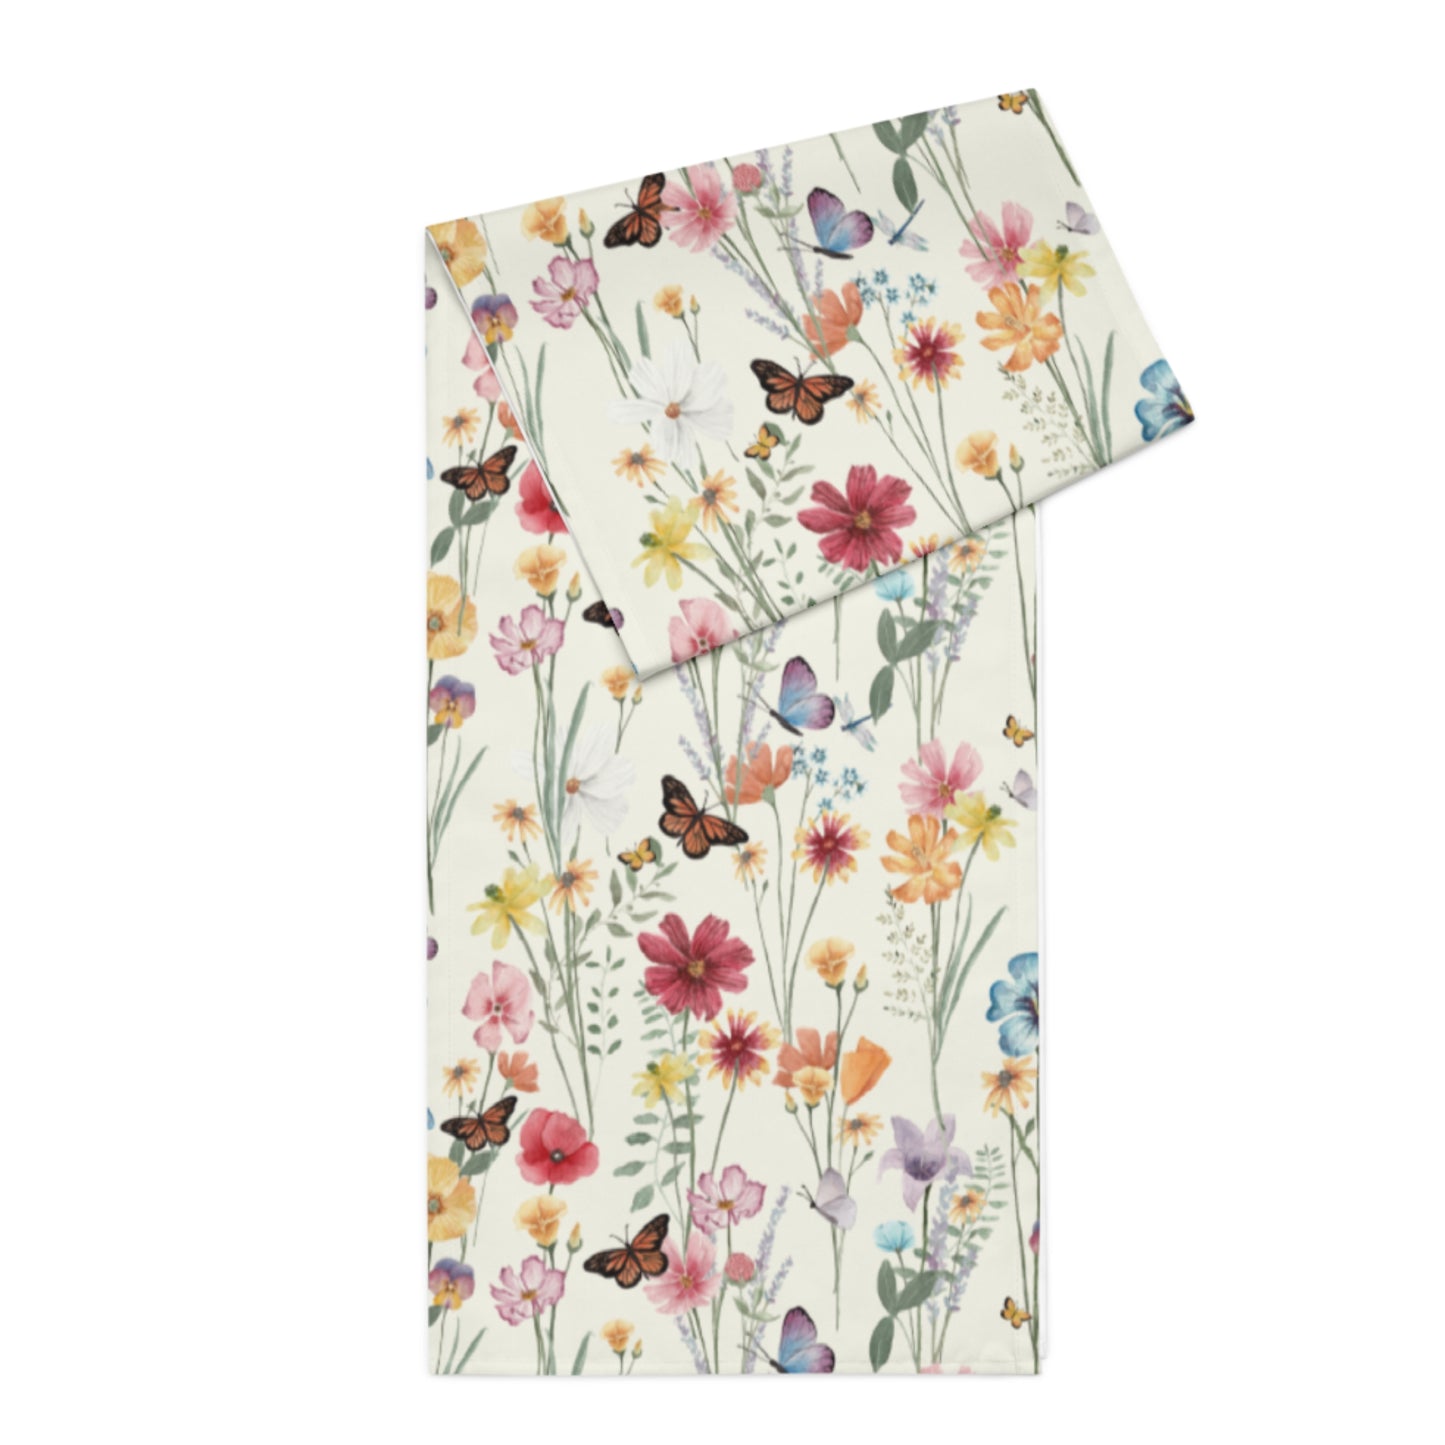 a botanical-theme table runner sitting on top of a table